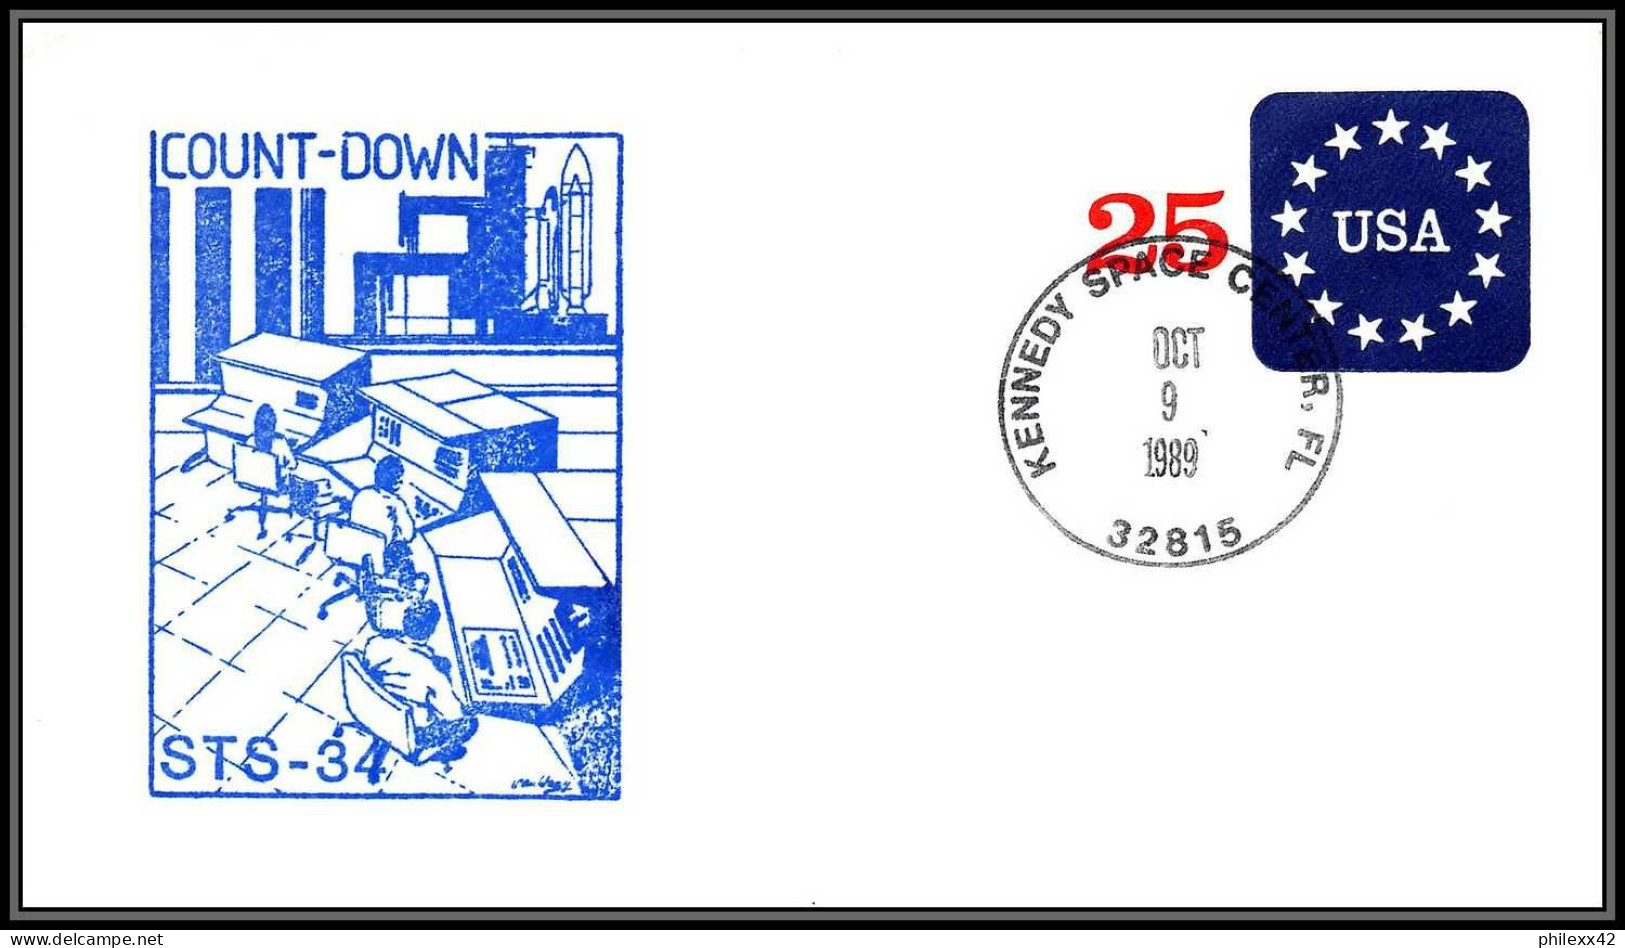 1814 Espace (space) Entier Postal (Stamped Stationery) USA STS 34 Count Down Atlantis Navette Shuttle - 9/10/1989 - Verenigde Staten